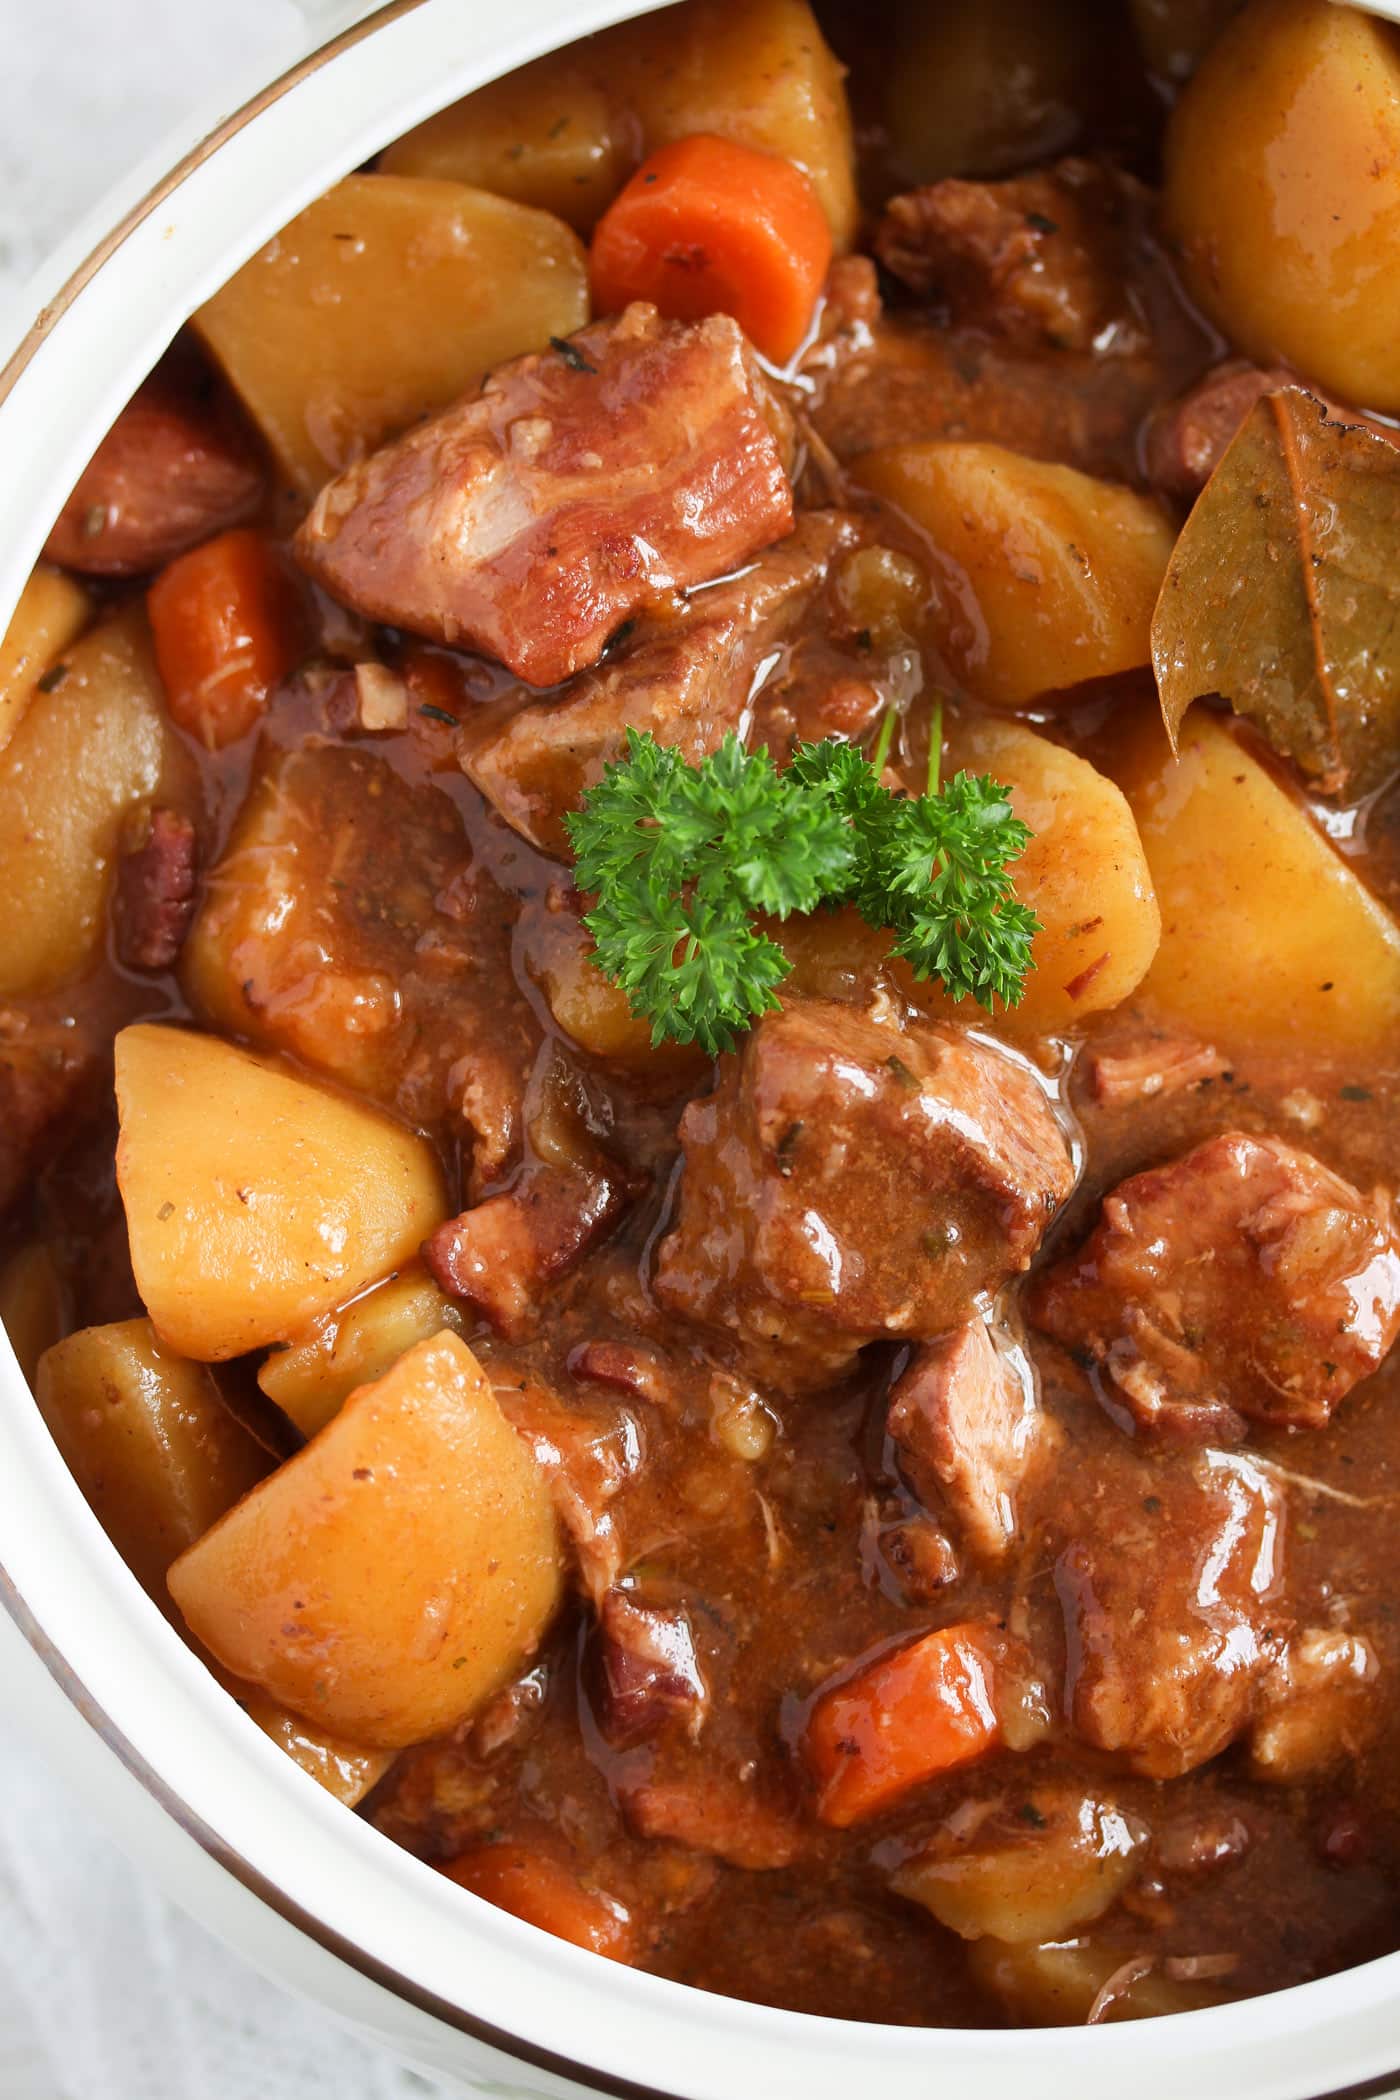 lamb casserole made in the slow cooker with potatoes and carrots.